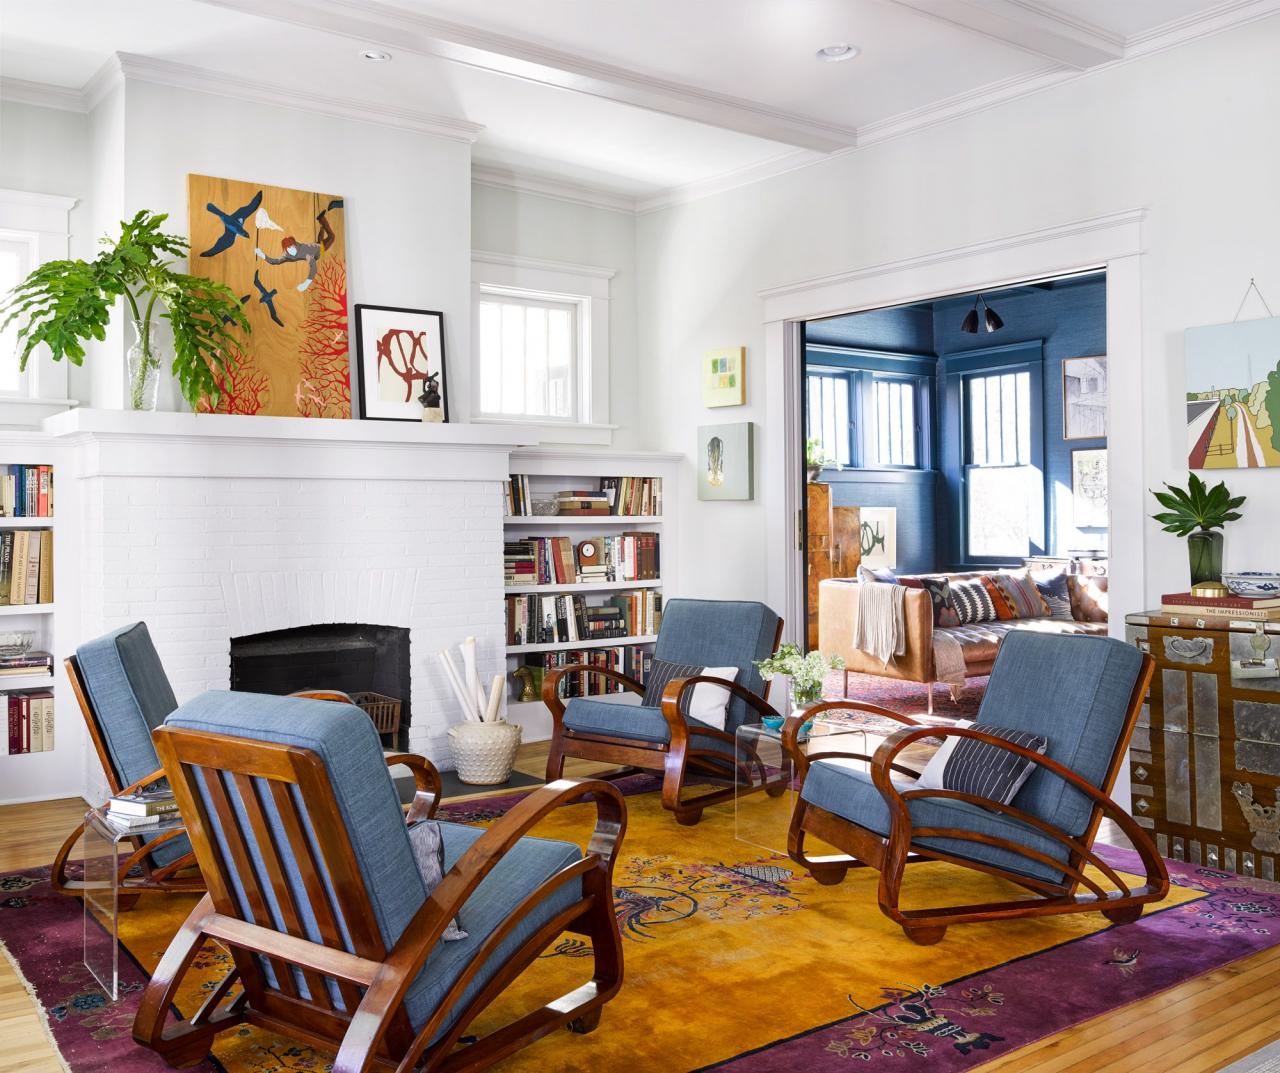 9 Ideas for Built-Ins Around a Fireplace that Add Character and Storage